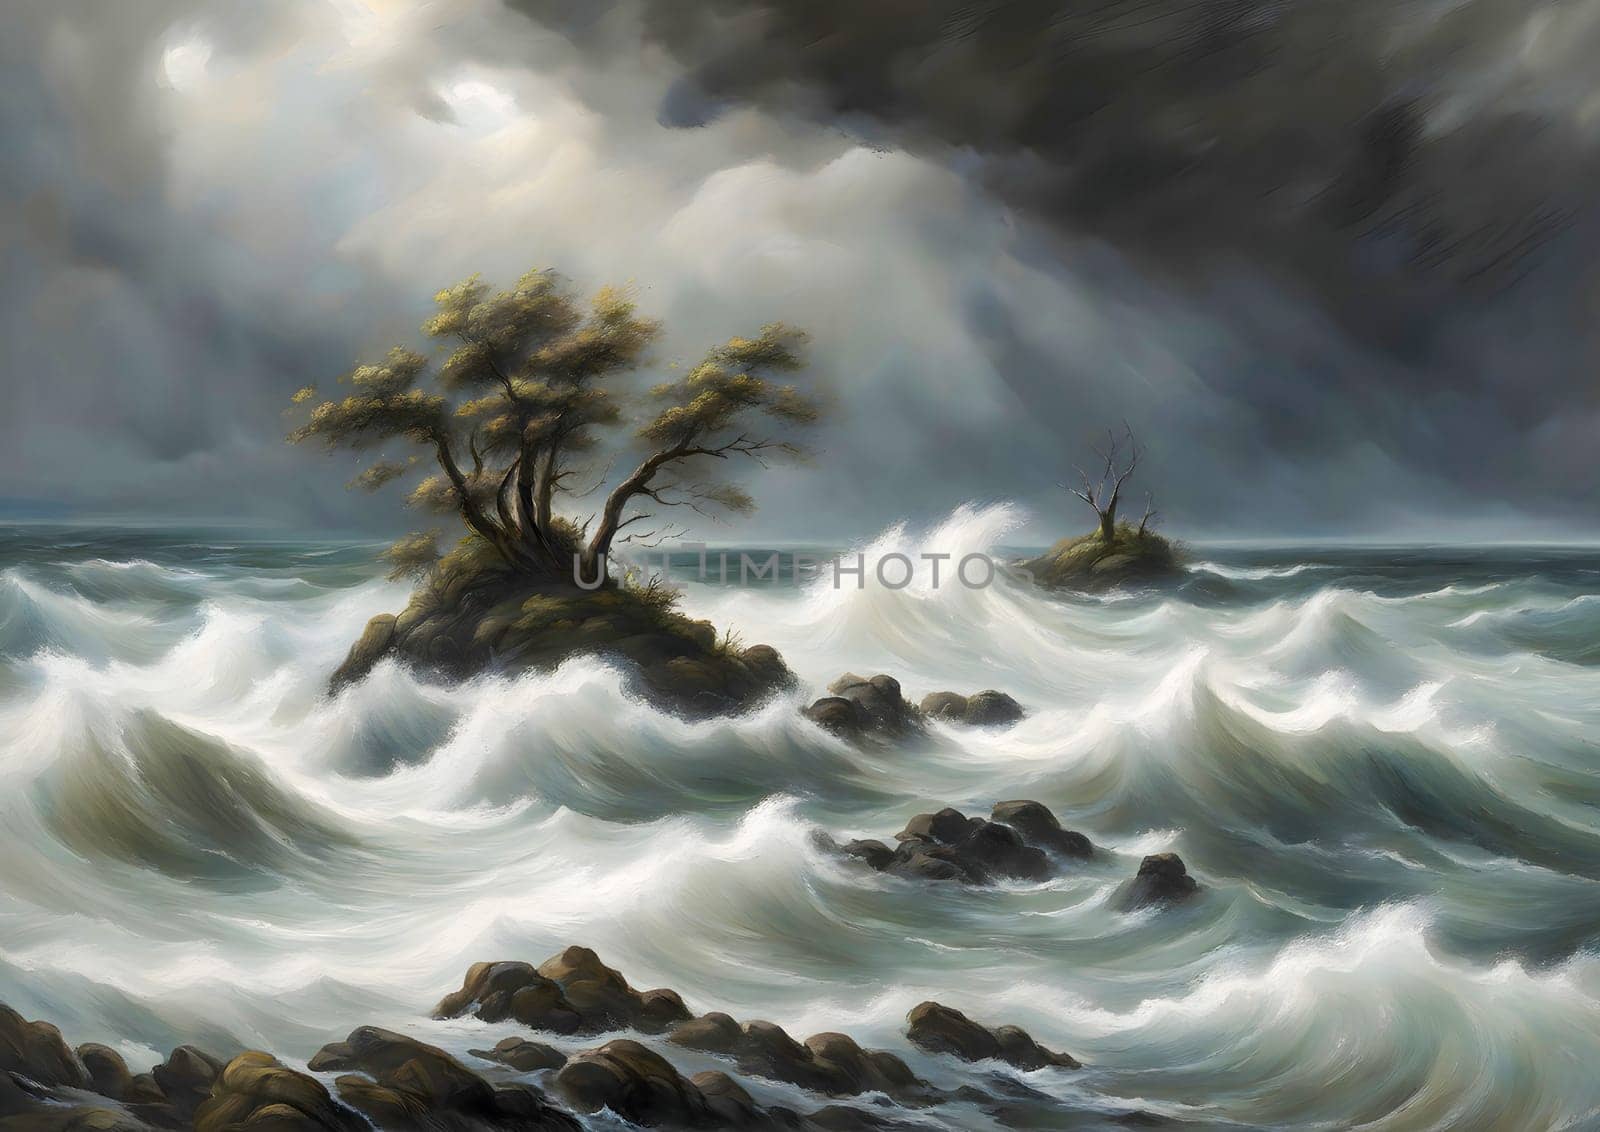 This painting shows a small island in the middle of a stormy ocean. The island is surrounded by waves and rocks, and trees grow on the island. by rostik924